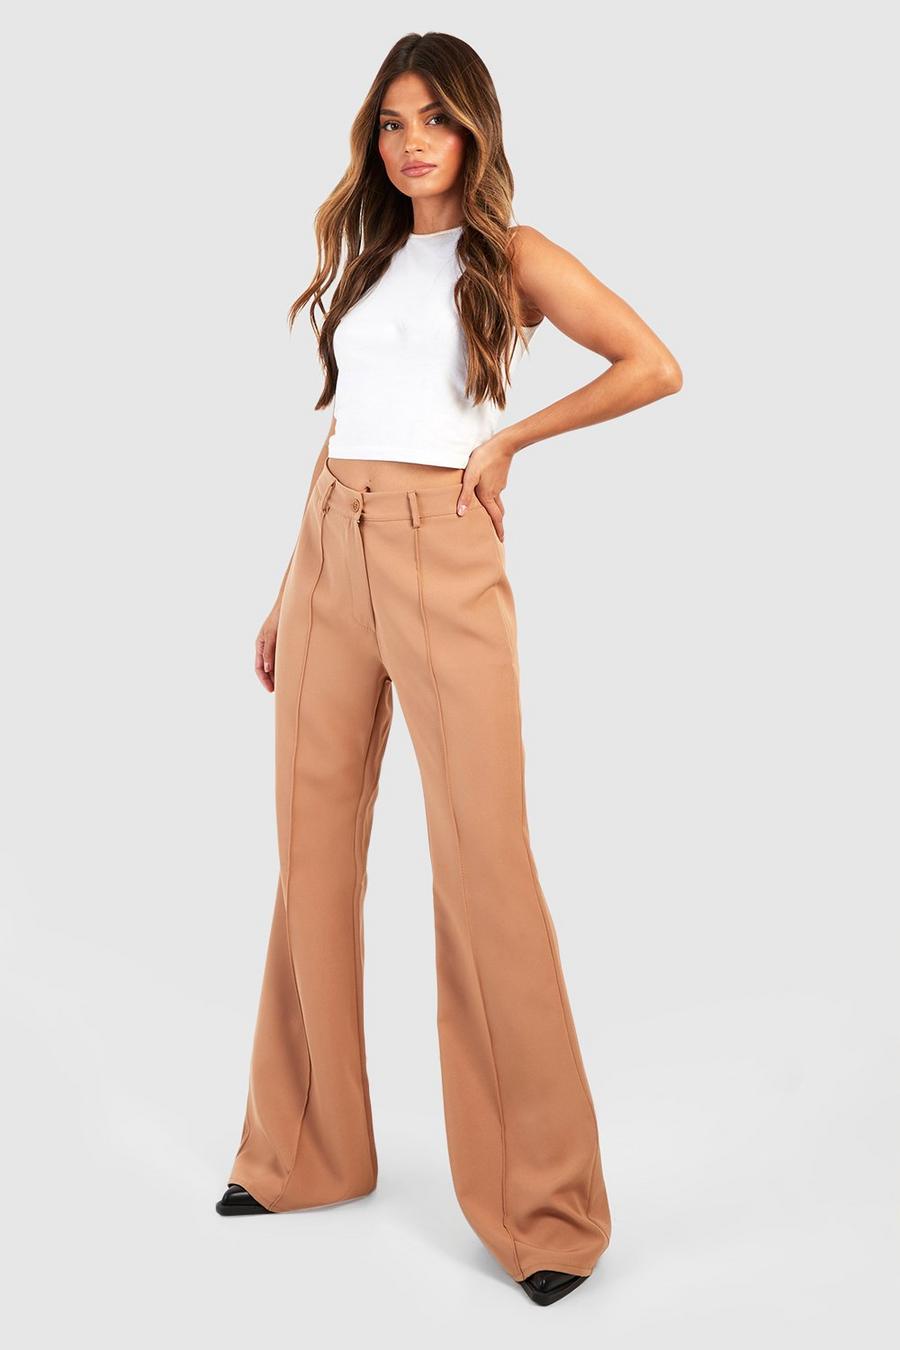 Camel Woven Seam Detail Flare Pants